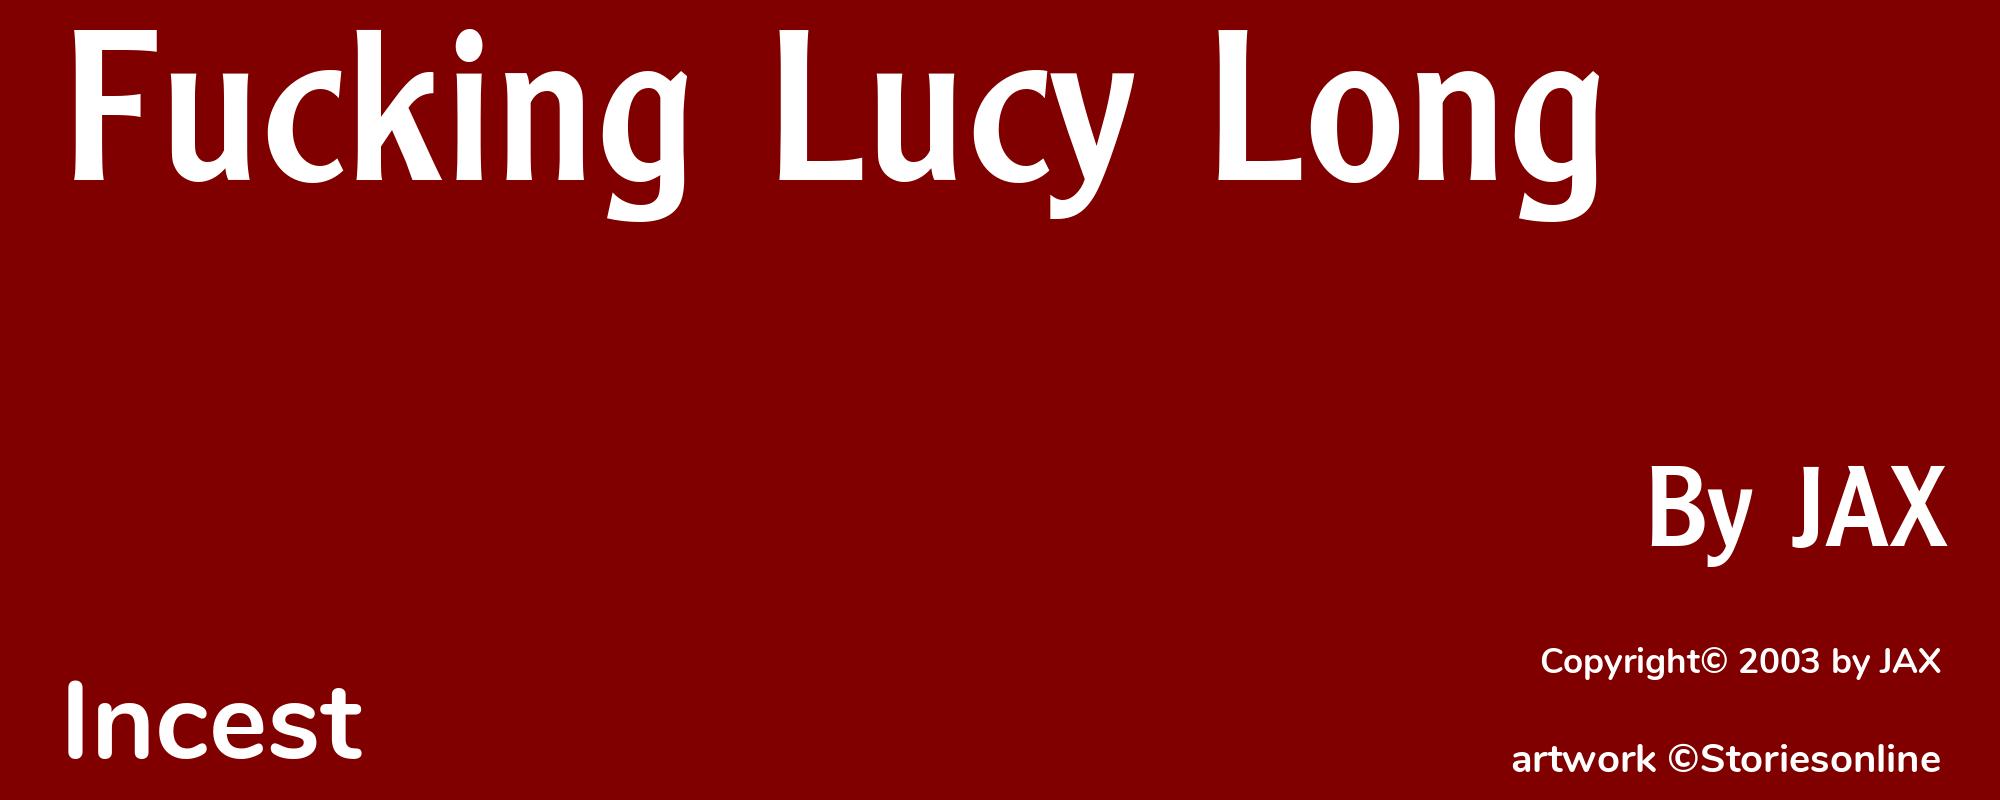 Fucking Lucy Long - Cover